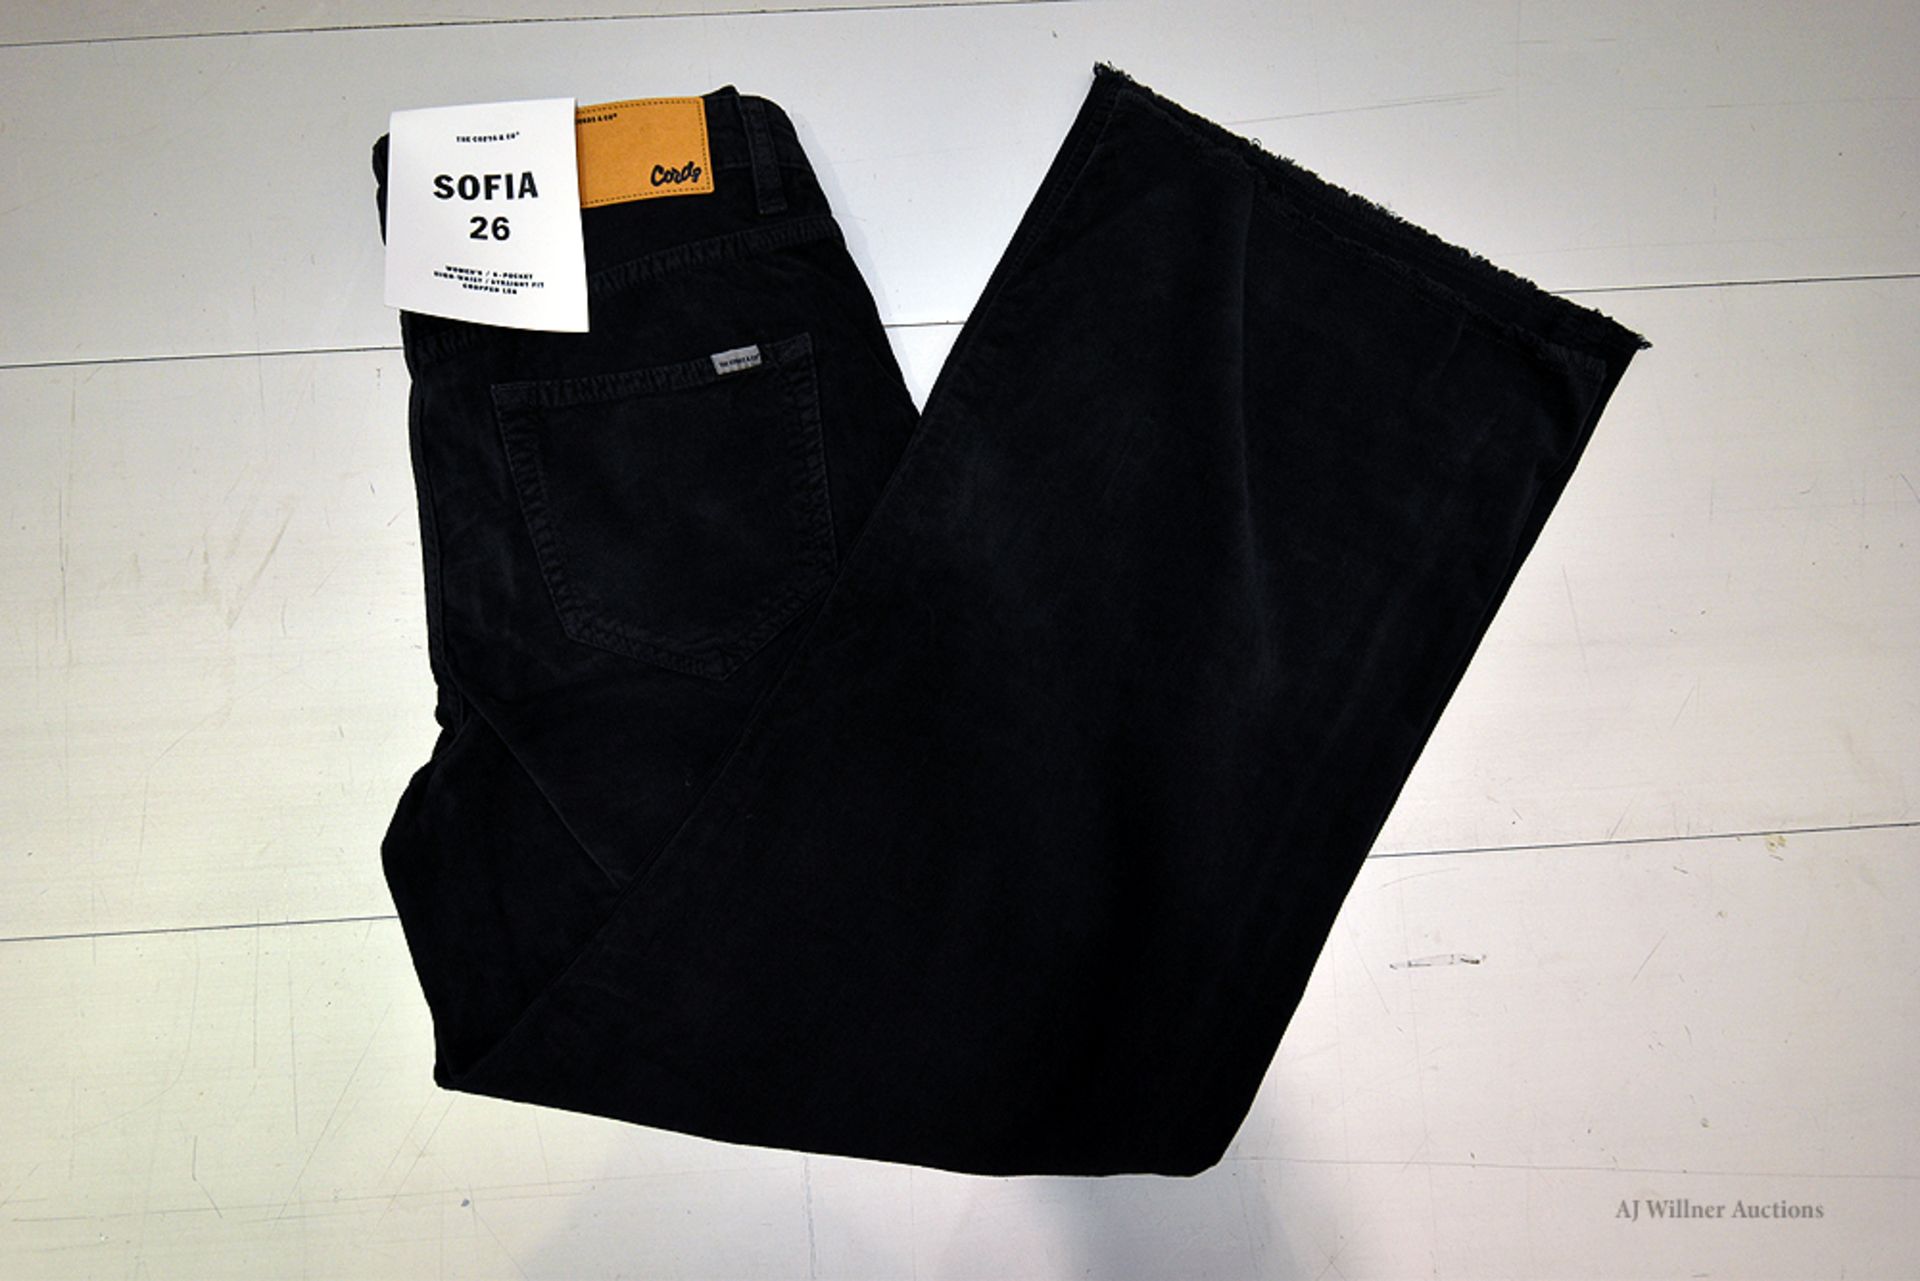 The Cords & Co. "Sofia" Style, Women's/ 5-Pocket/High-Waist/ Straight Fit/ Cropped Leg Pants(Black)